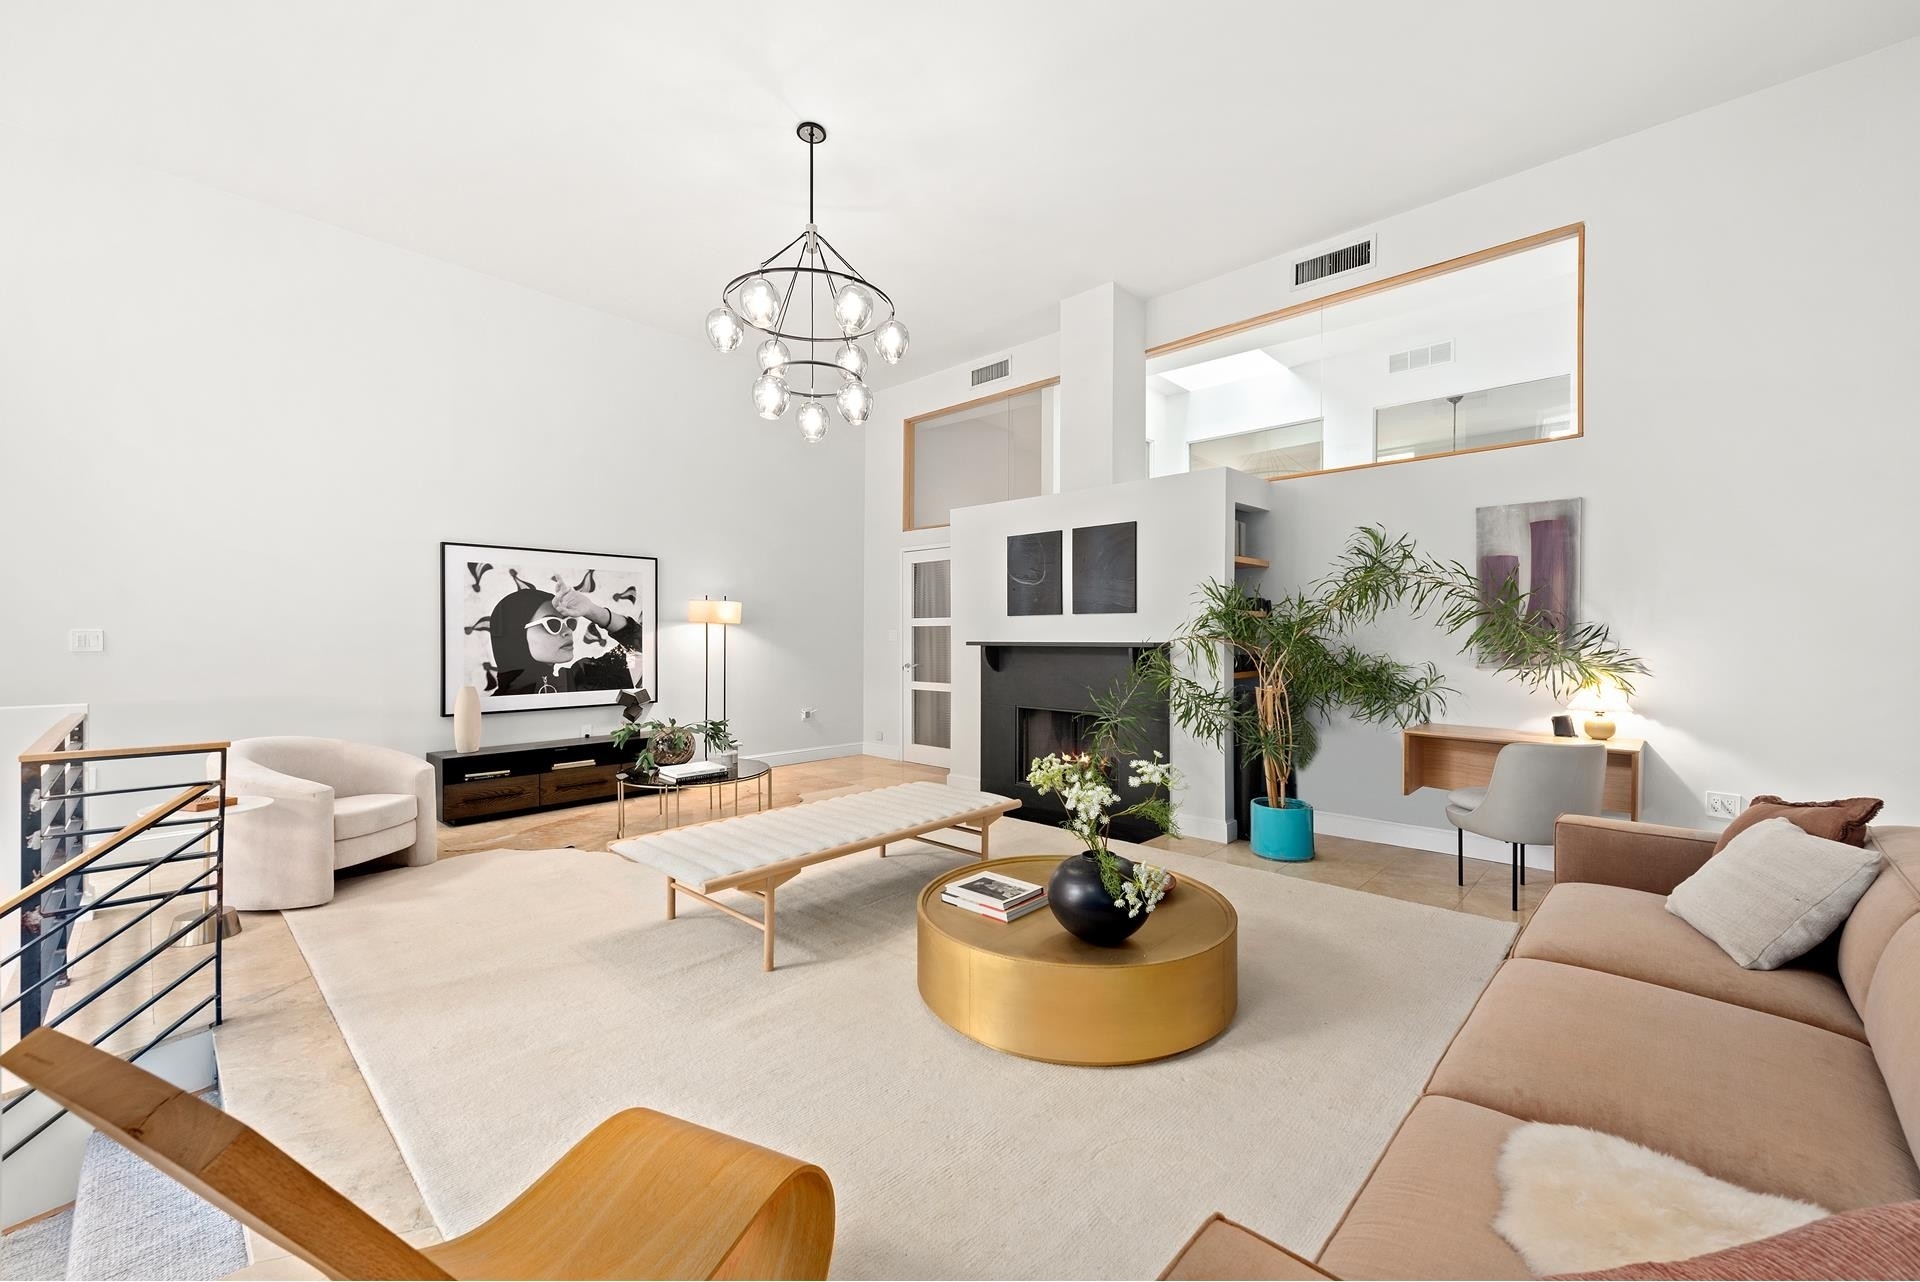 2. Condominiums for Sale at 17 MURRAY ST, PH TriBeCa, New York, New York 10007